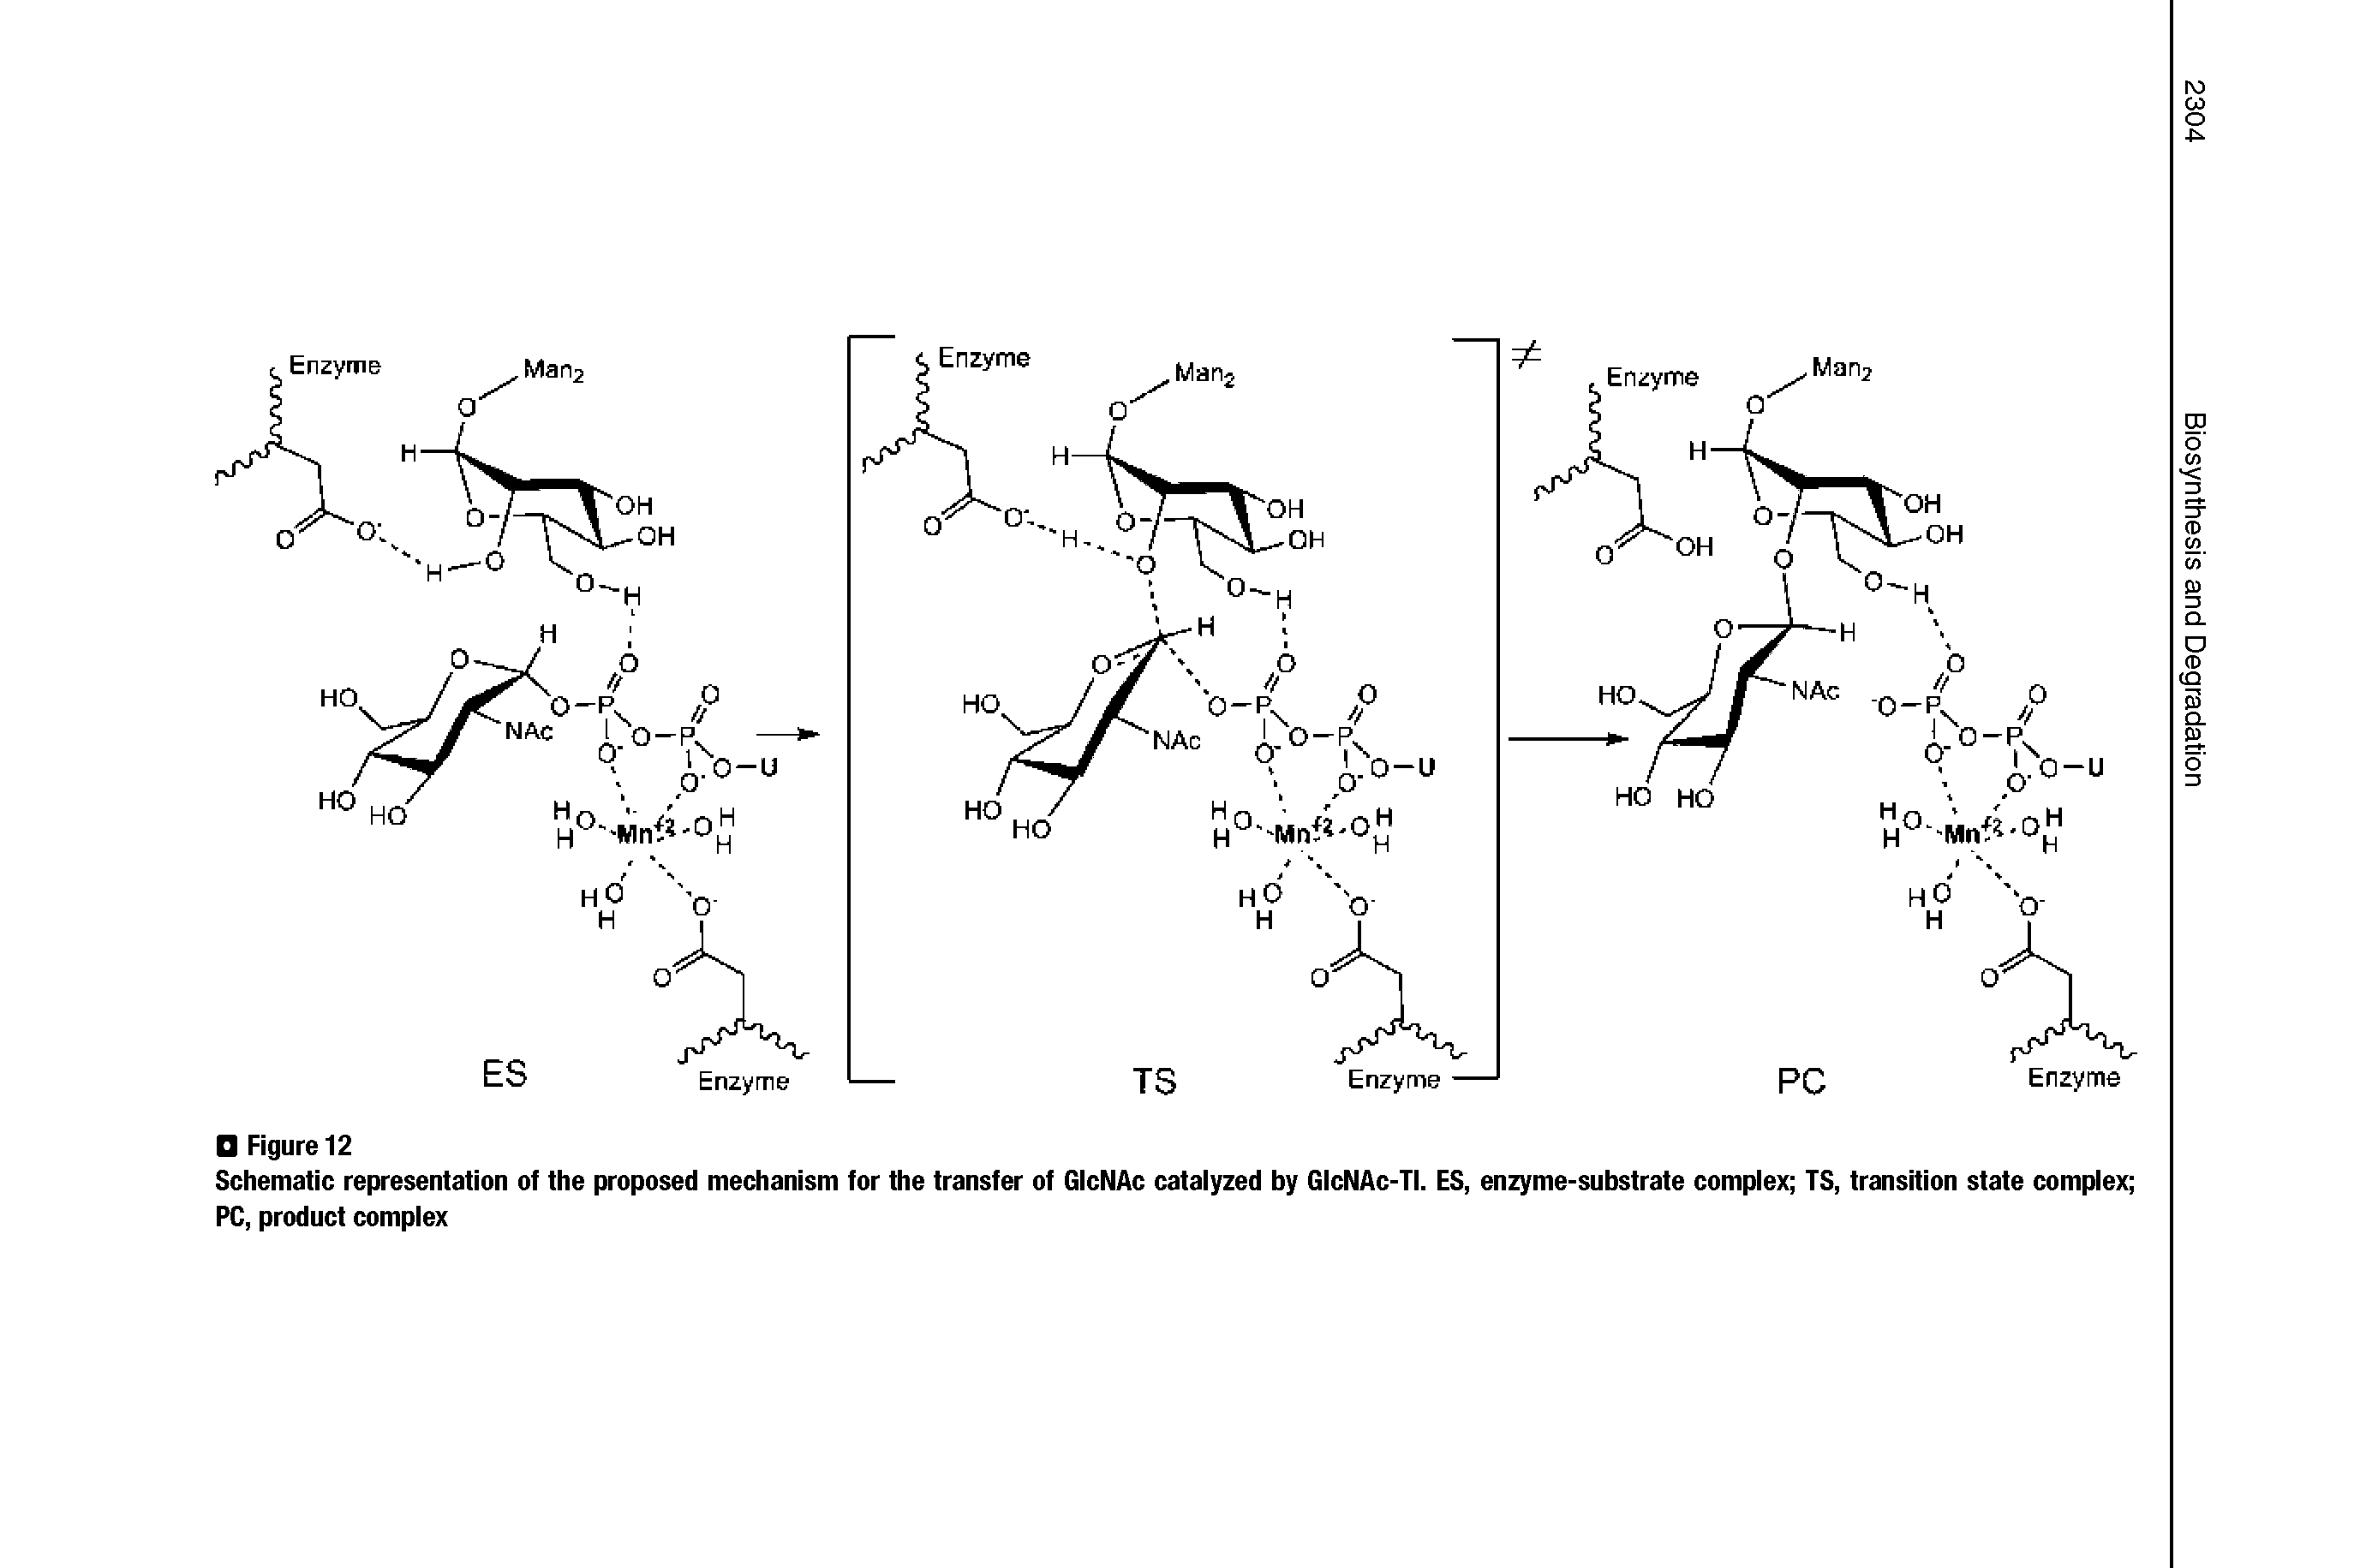 Schematic representation of the proposed mechanism for the transfer of GIcNAc catalyzed by GIcNAc-TI. ES, enzyme-substrate complex TS, transition state complex PC, product complex...